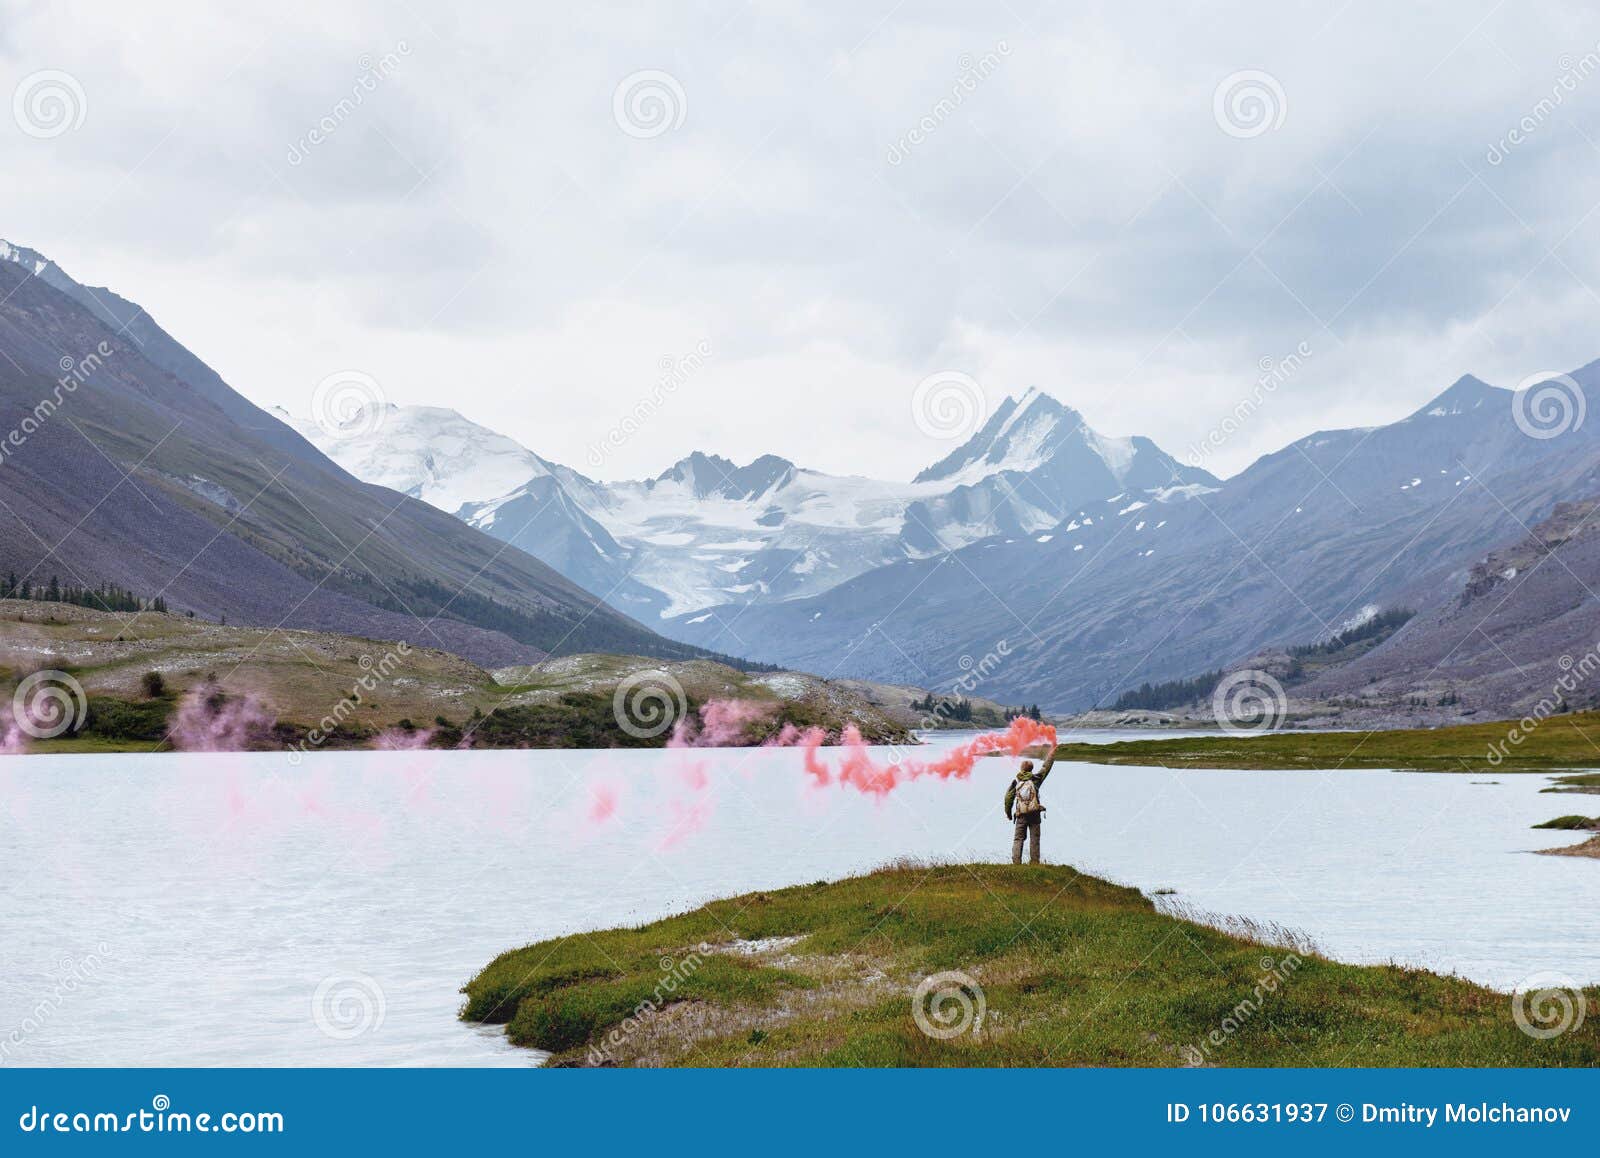 man with signal fire on background of mountain lake